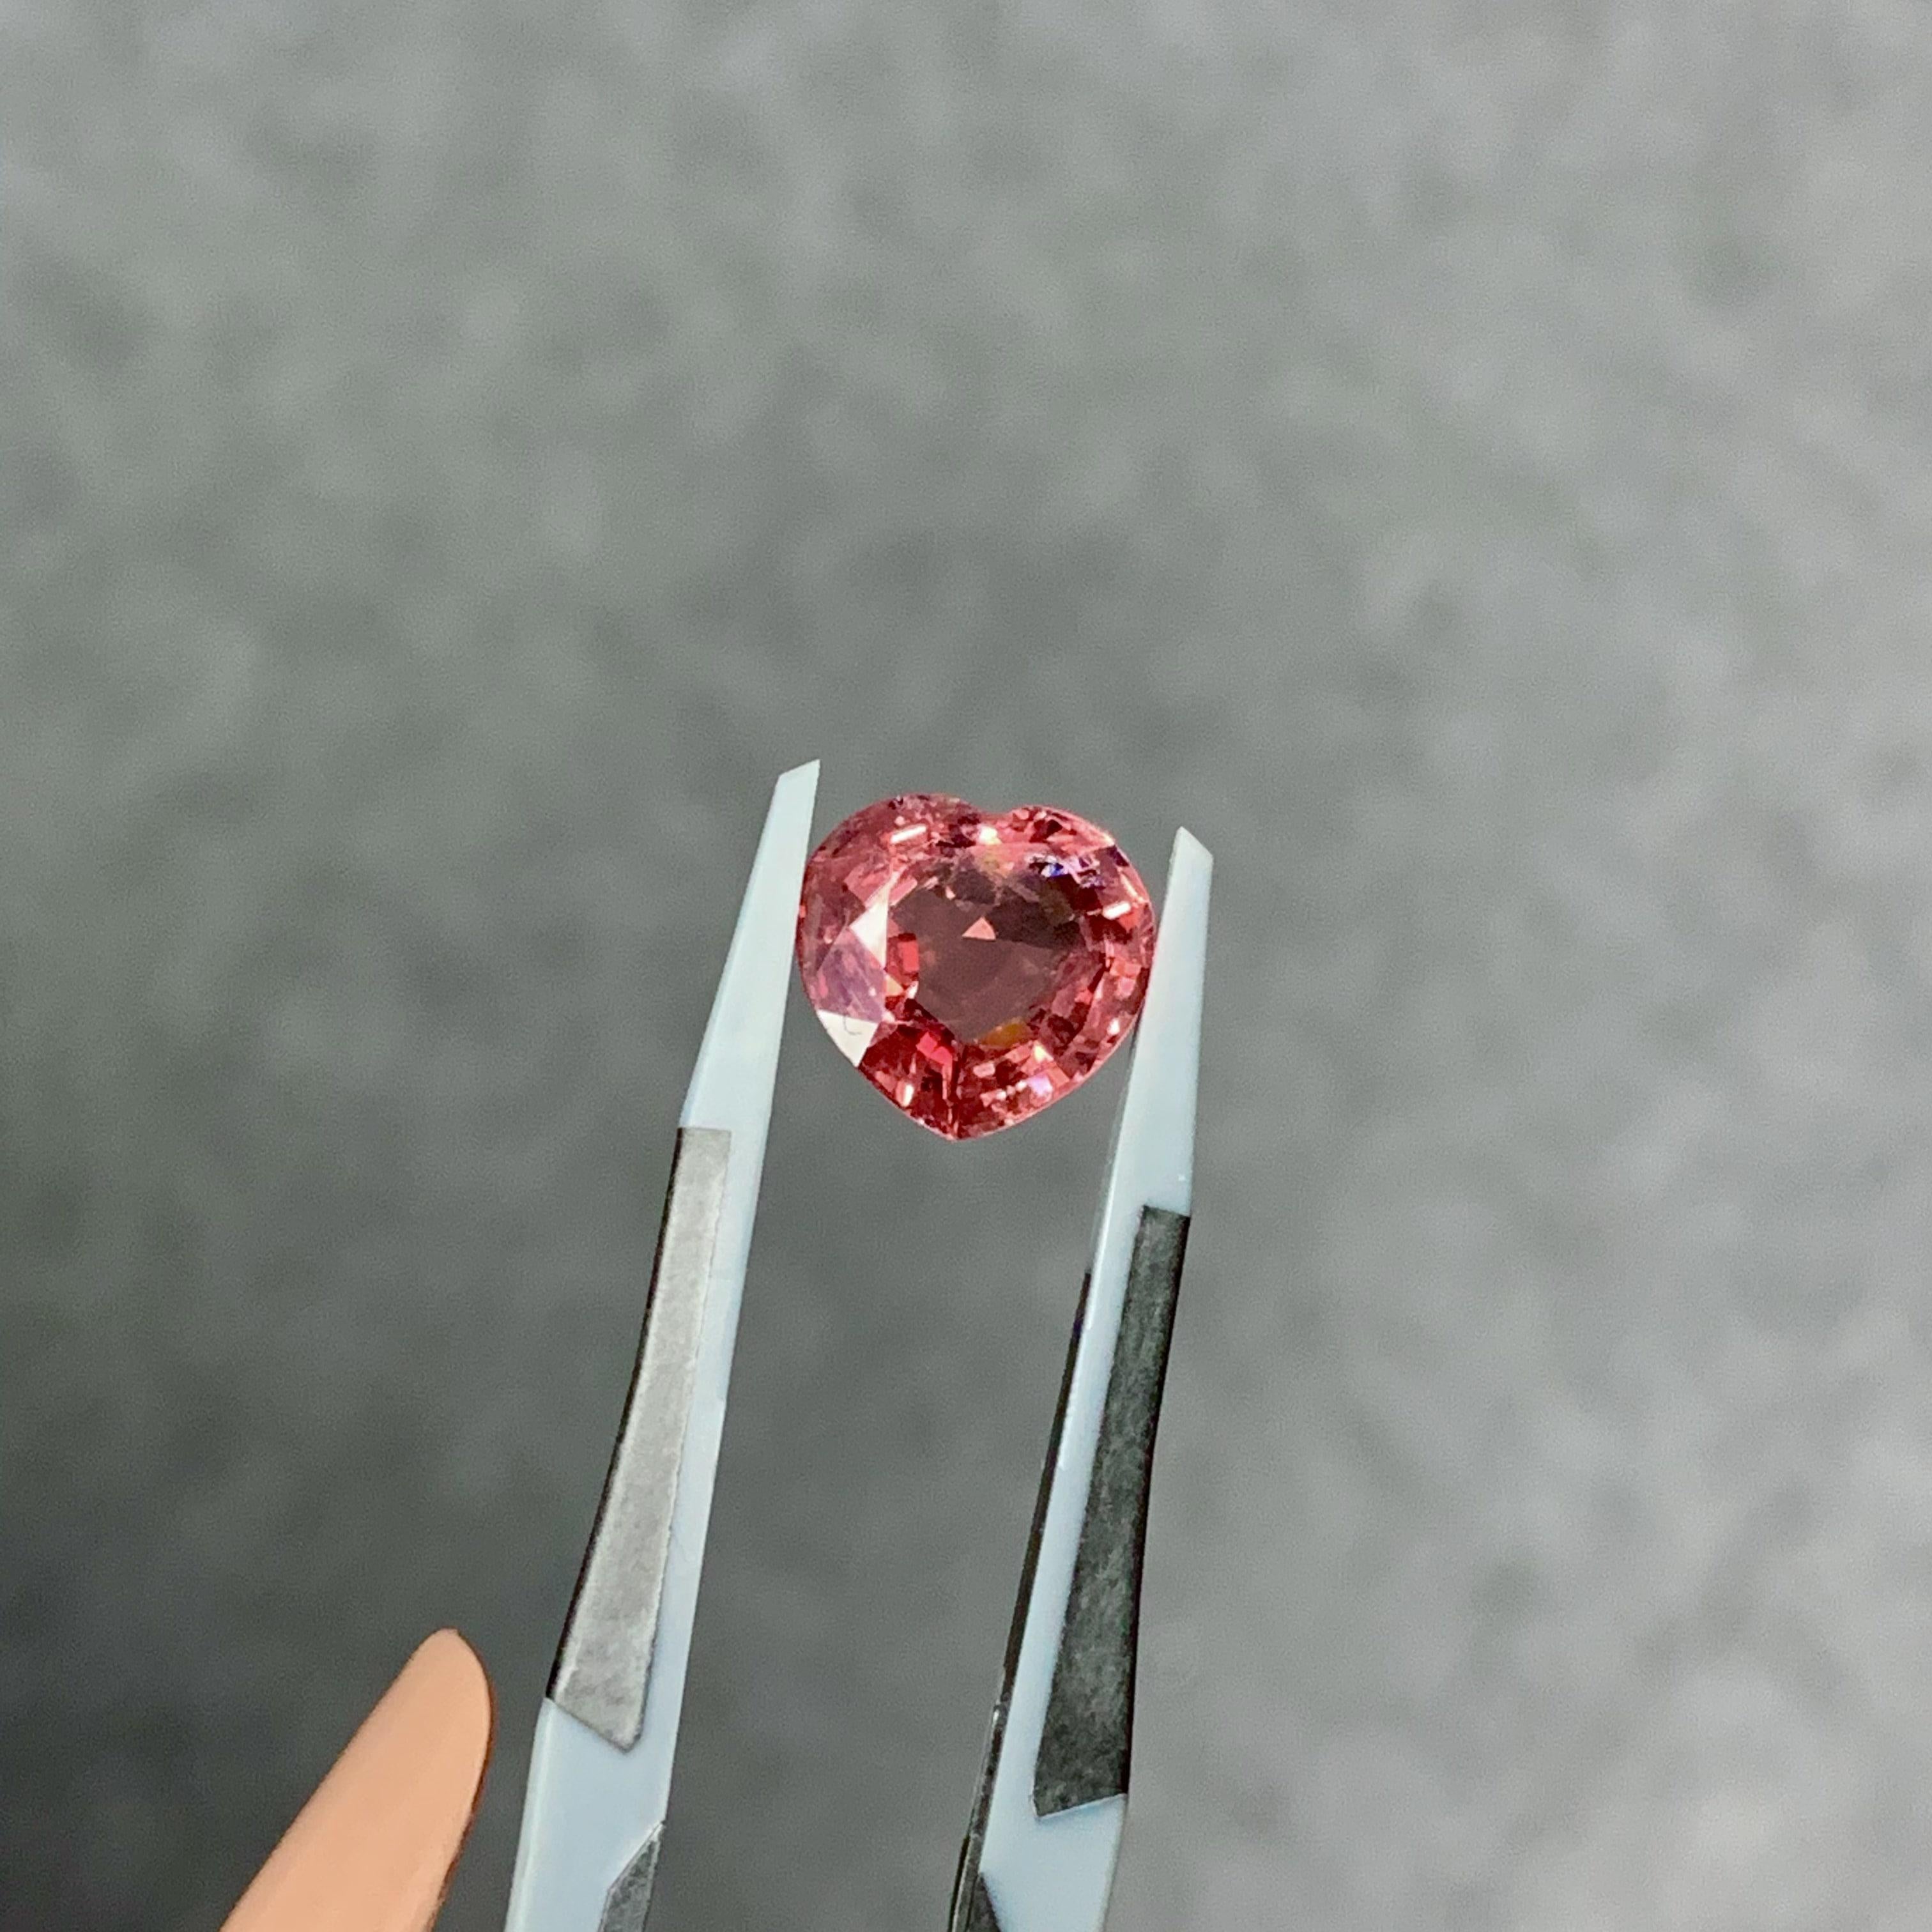 A lovely, stunning 3.97 Carat Spinel stone that has a beautiful orangish and pink tone. The spinel piece is cut perfectly into a heart shape.

The spinel originates from Tanzania and is a 100% natural. It has not undergone any form of heating or